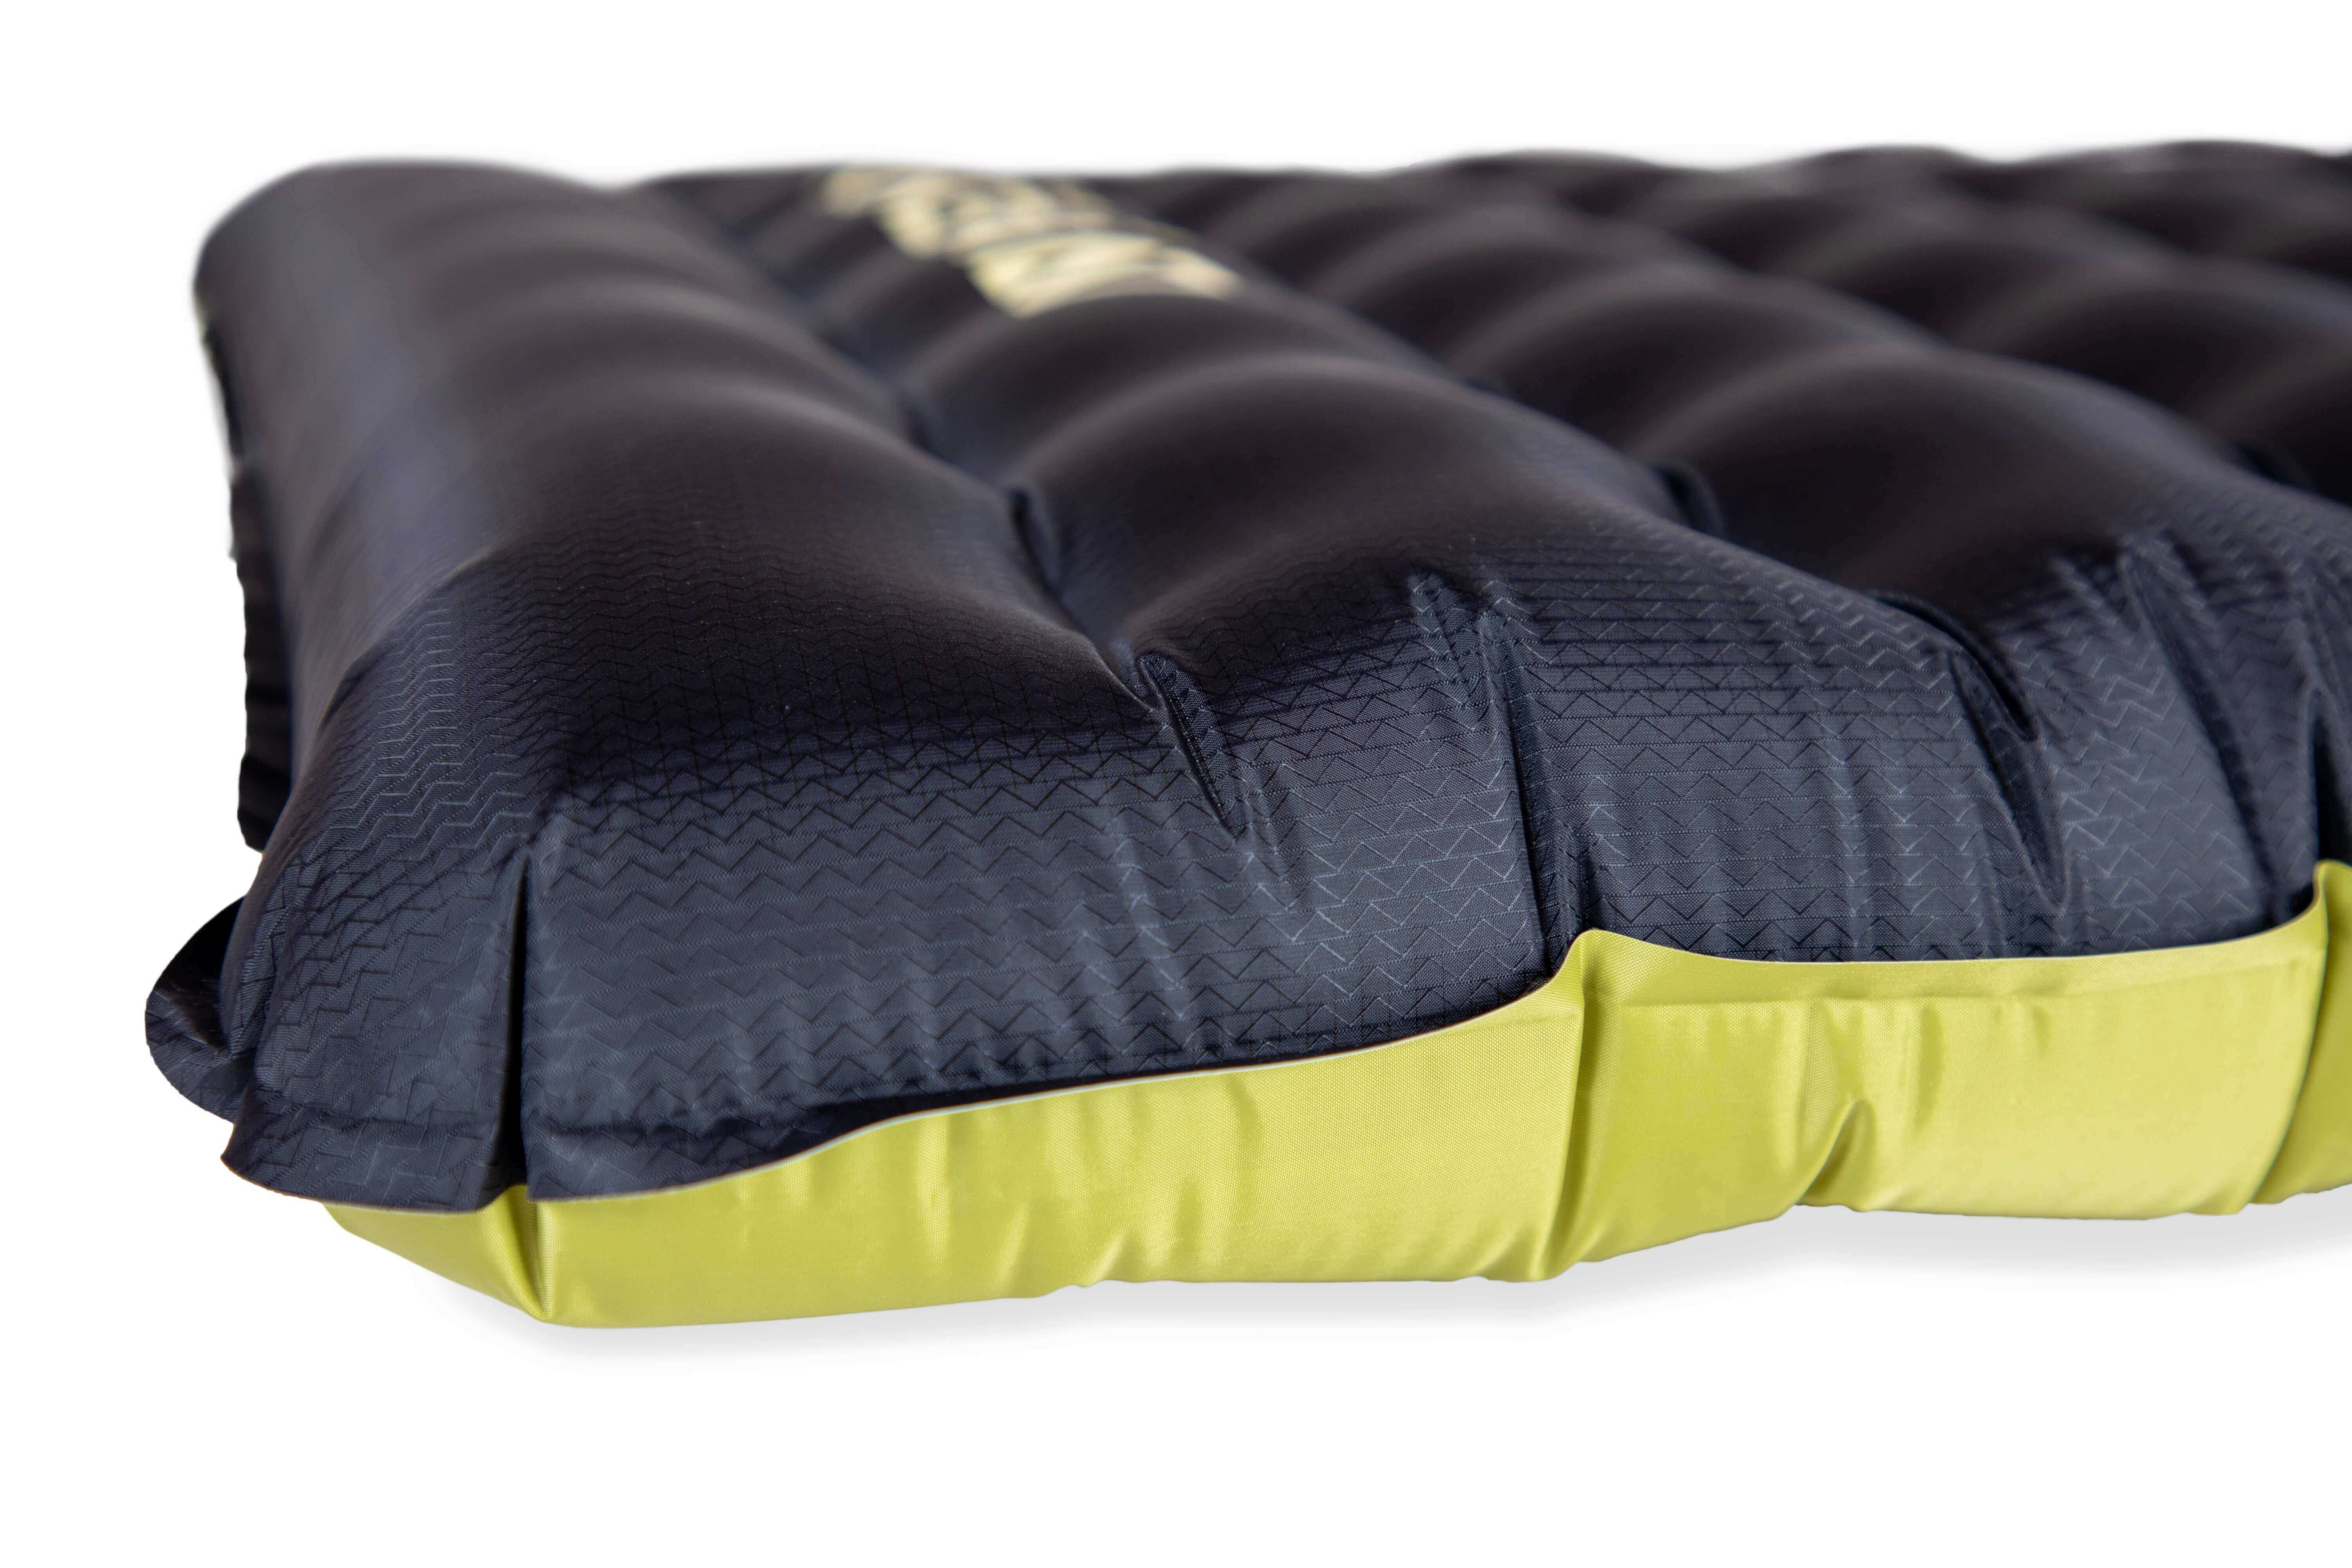 Nemo Tensor™ Extreme Conditions Insulated Sleeping Pad